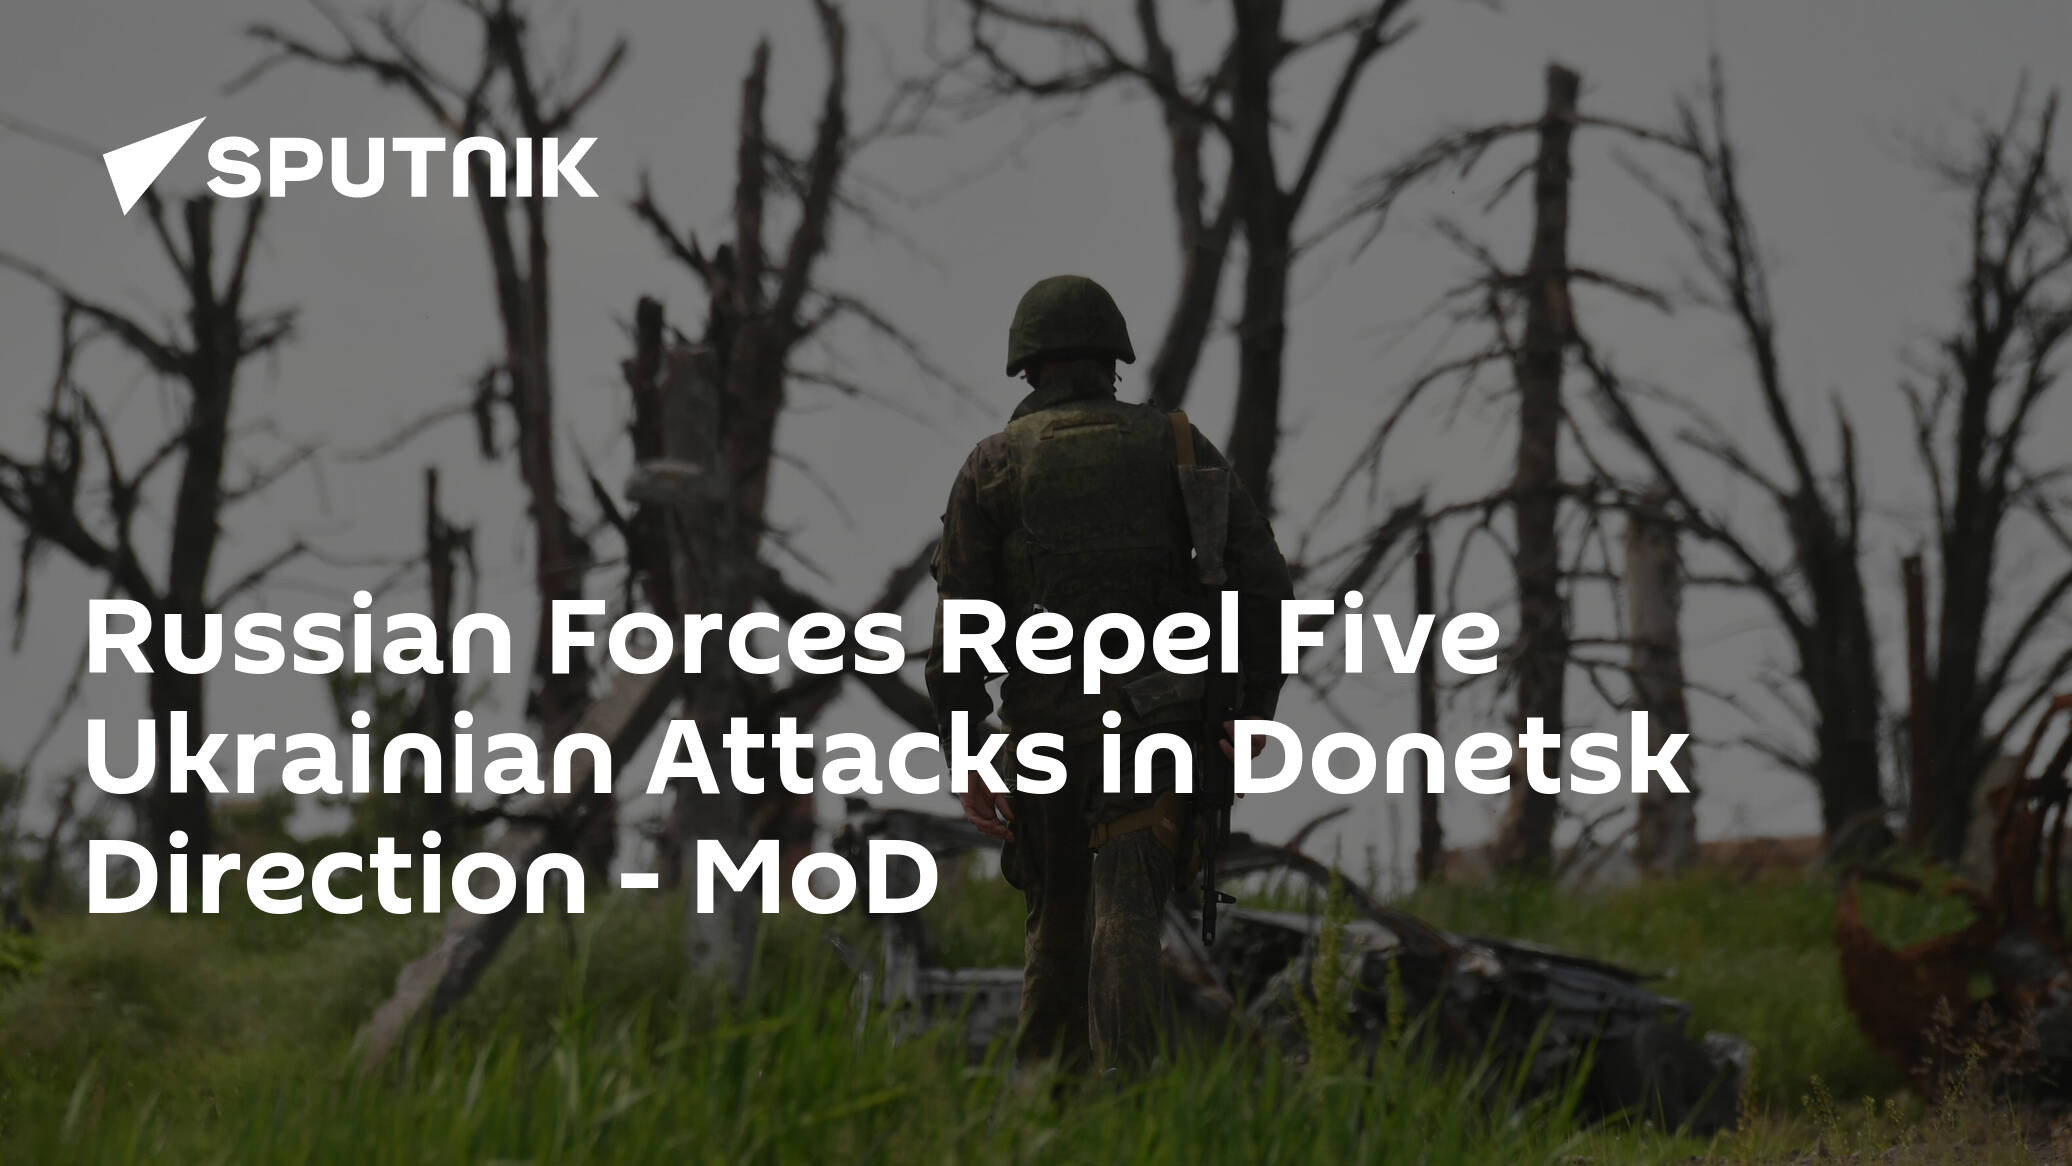 Russian Forces Repel Five Ukrainian Attacks in Donetsk Direction – MoD